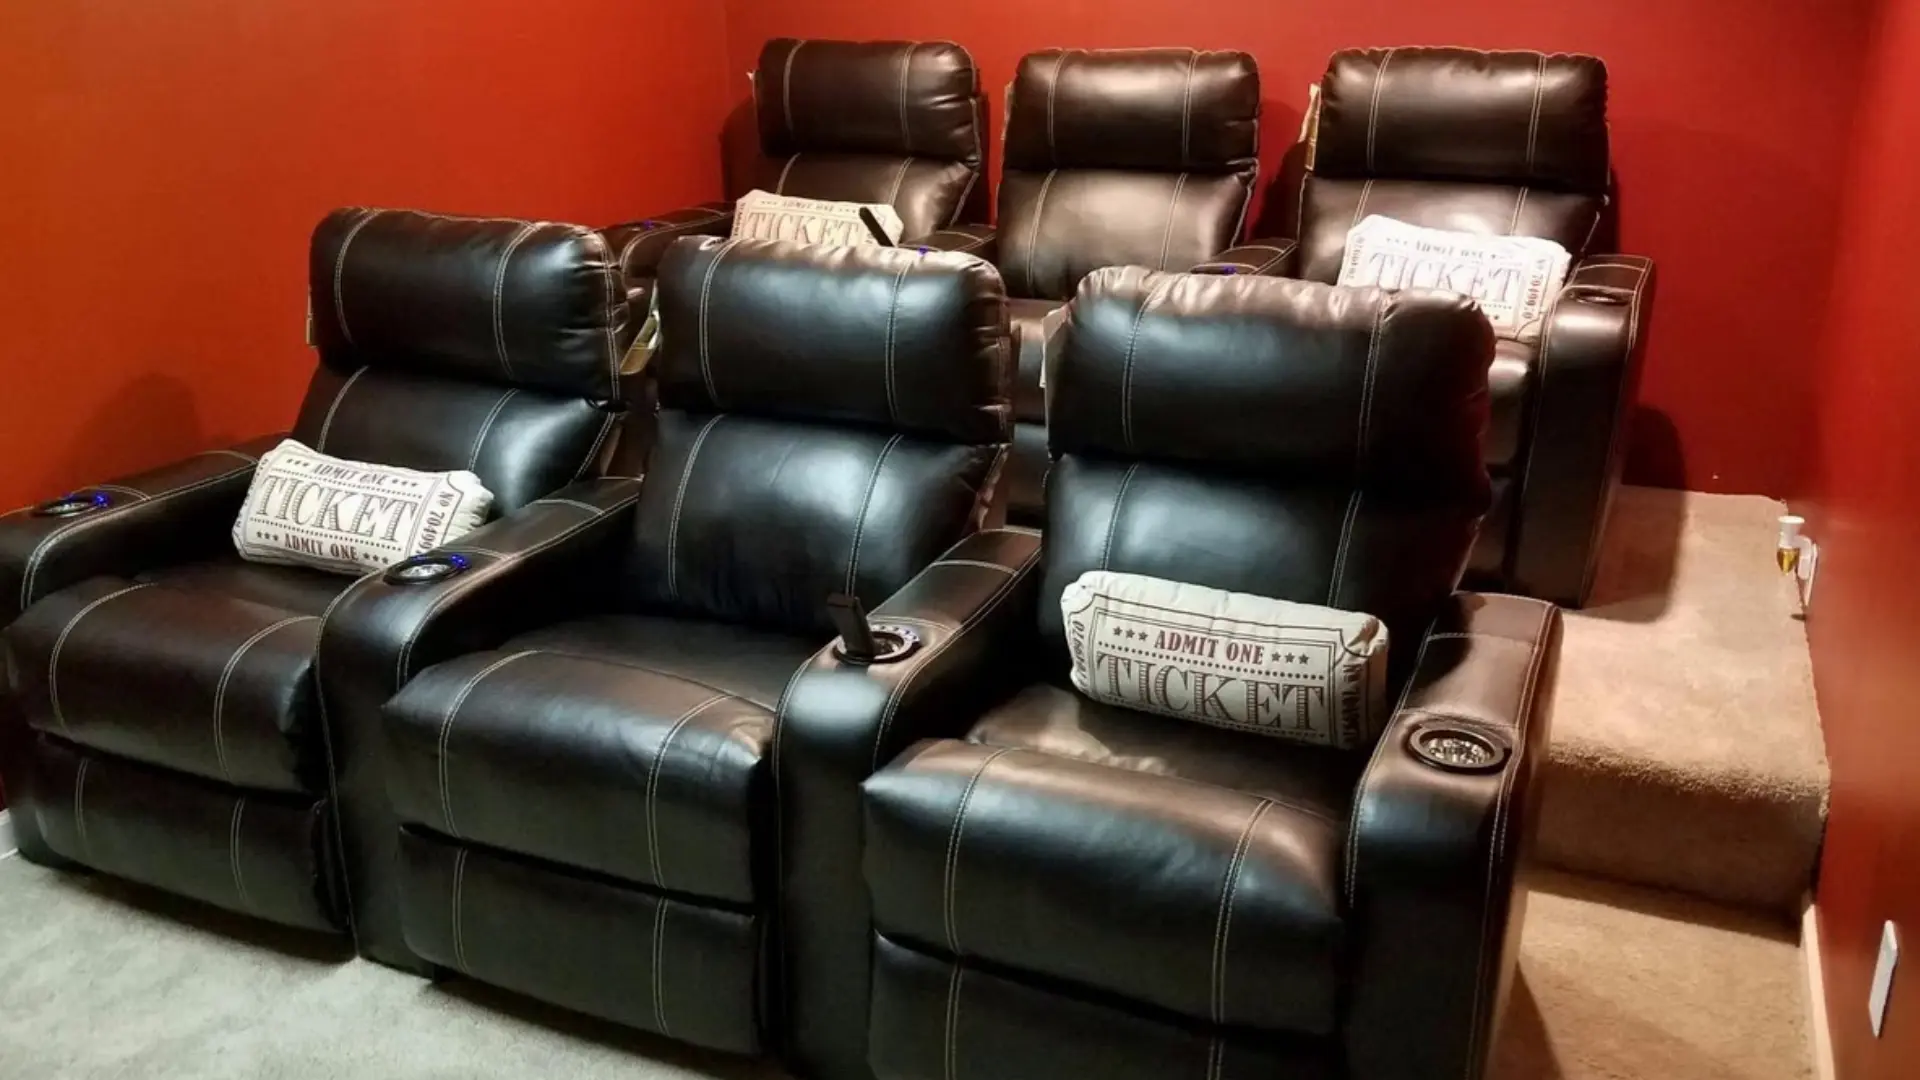 Seatcraft Dynasty Home Theater Seating